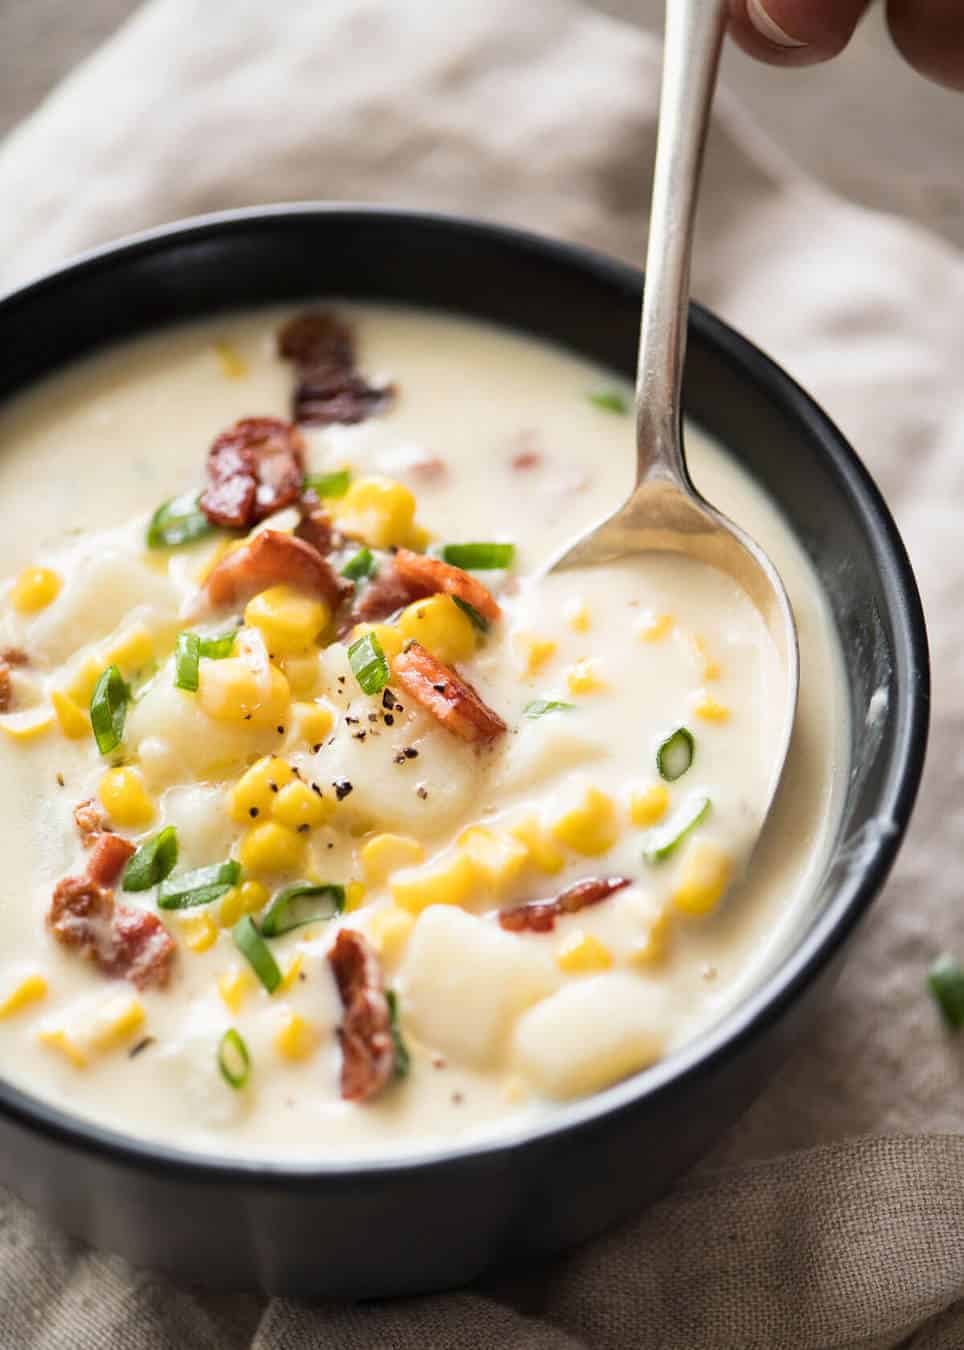 Creamy Corn Chowder with Bacon, with a couple of simple tips for make it extra tasty! www.recipetineats.com